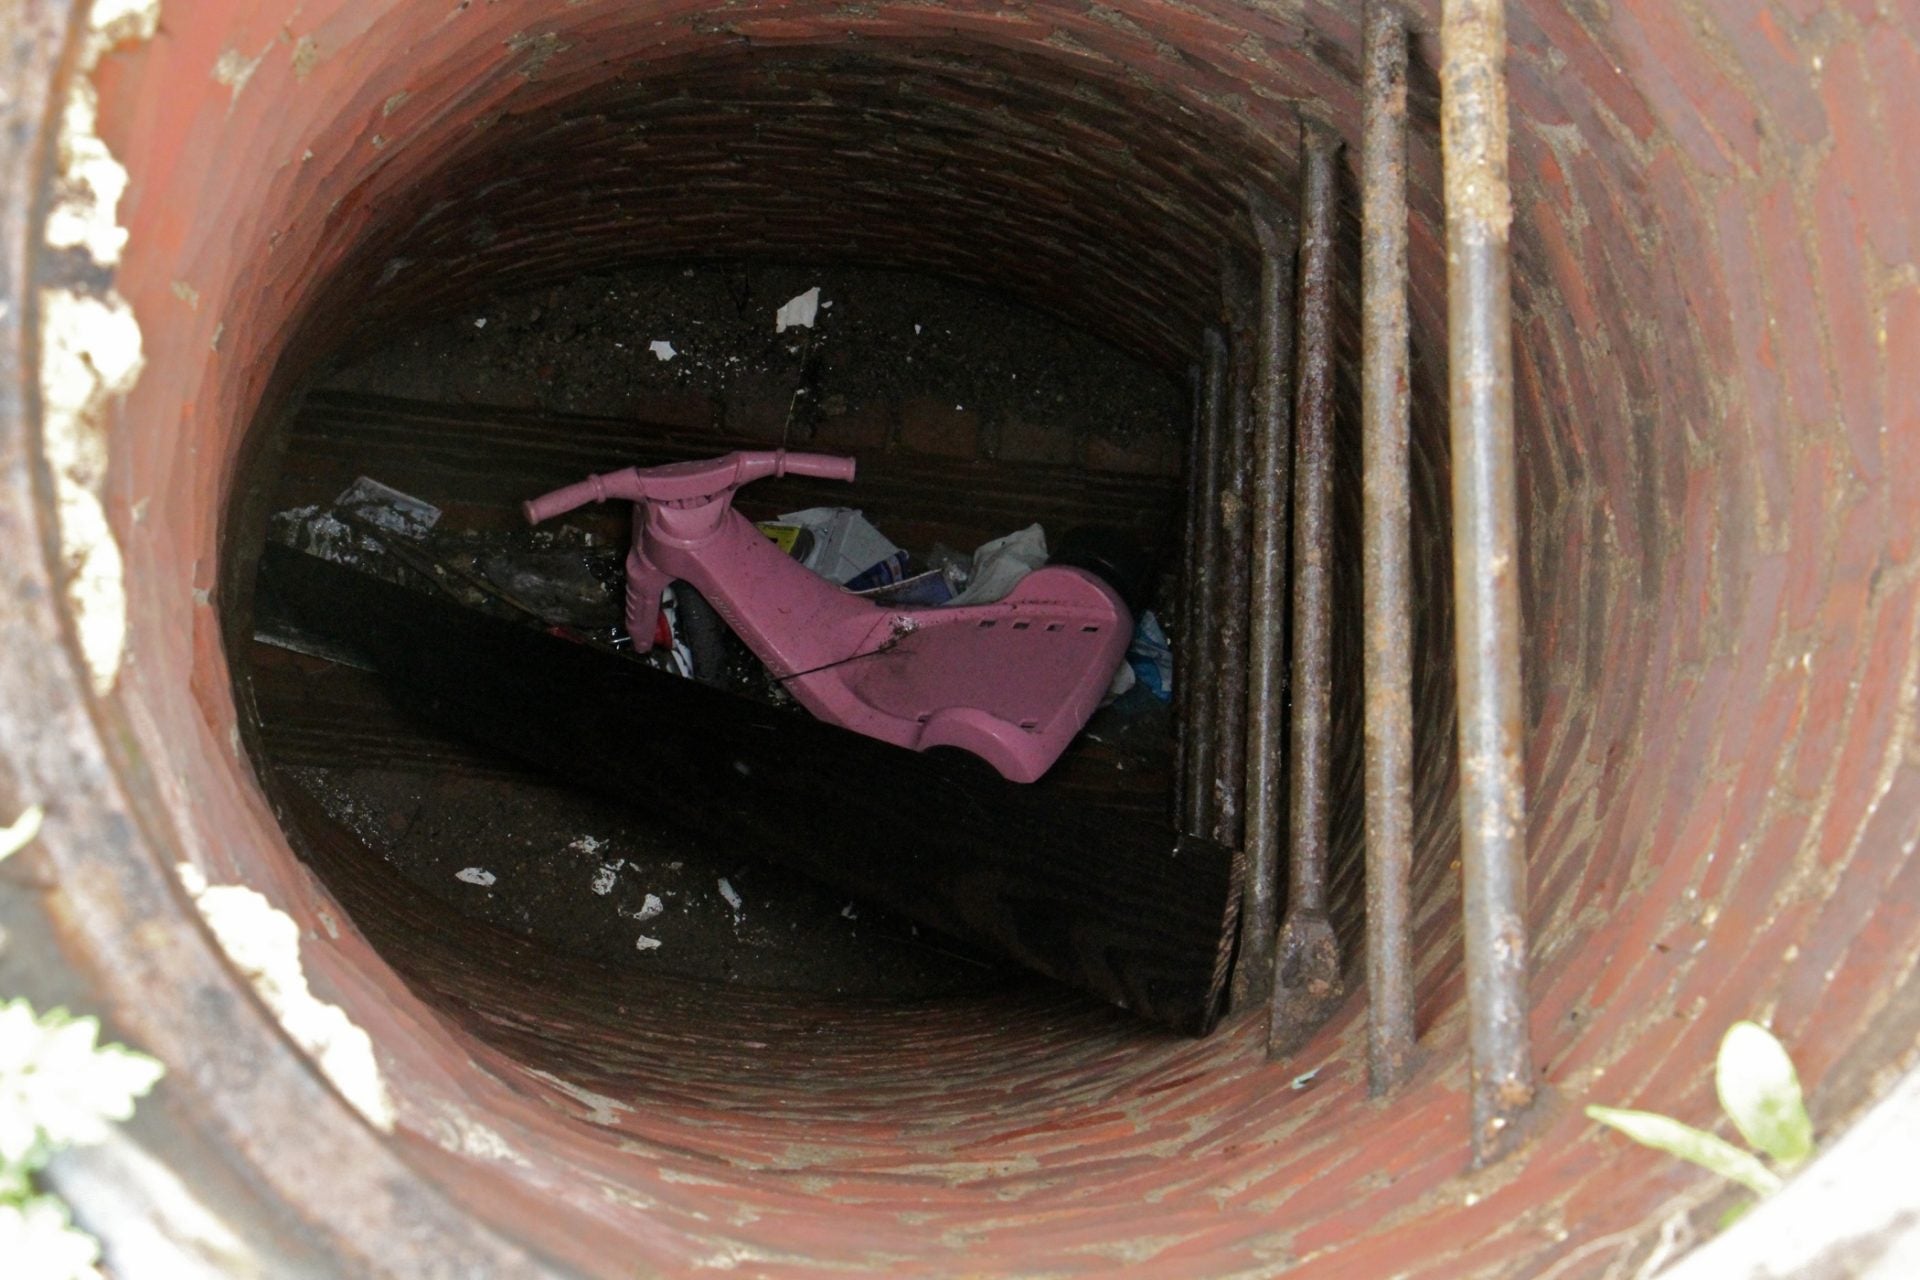 Plastics, large and small, often end up in urban sewer systems like this one in Philadelphia. The smaller pieces can end up polluting rivers, streams and oceans. 